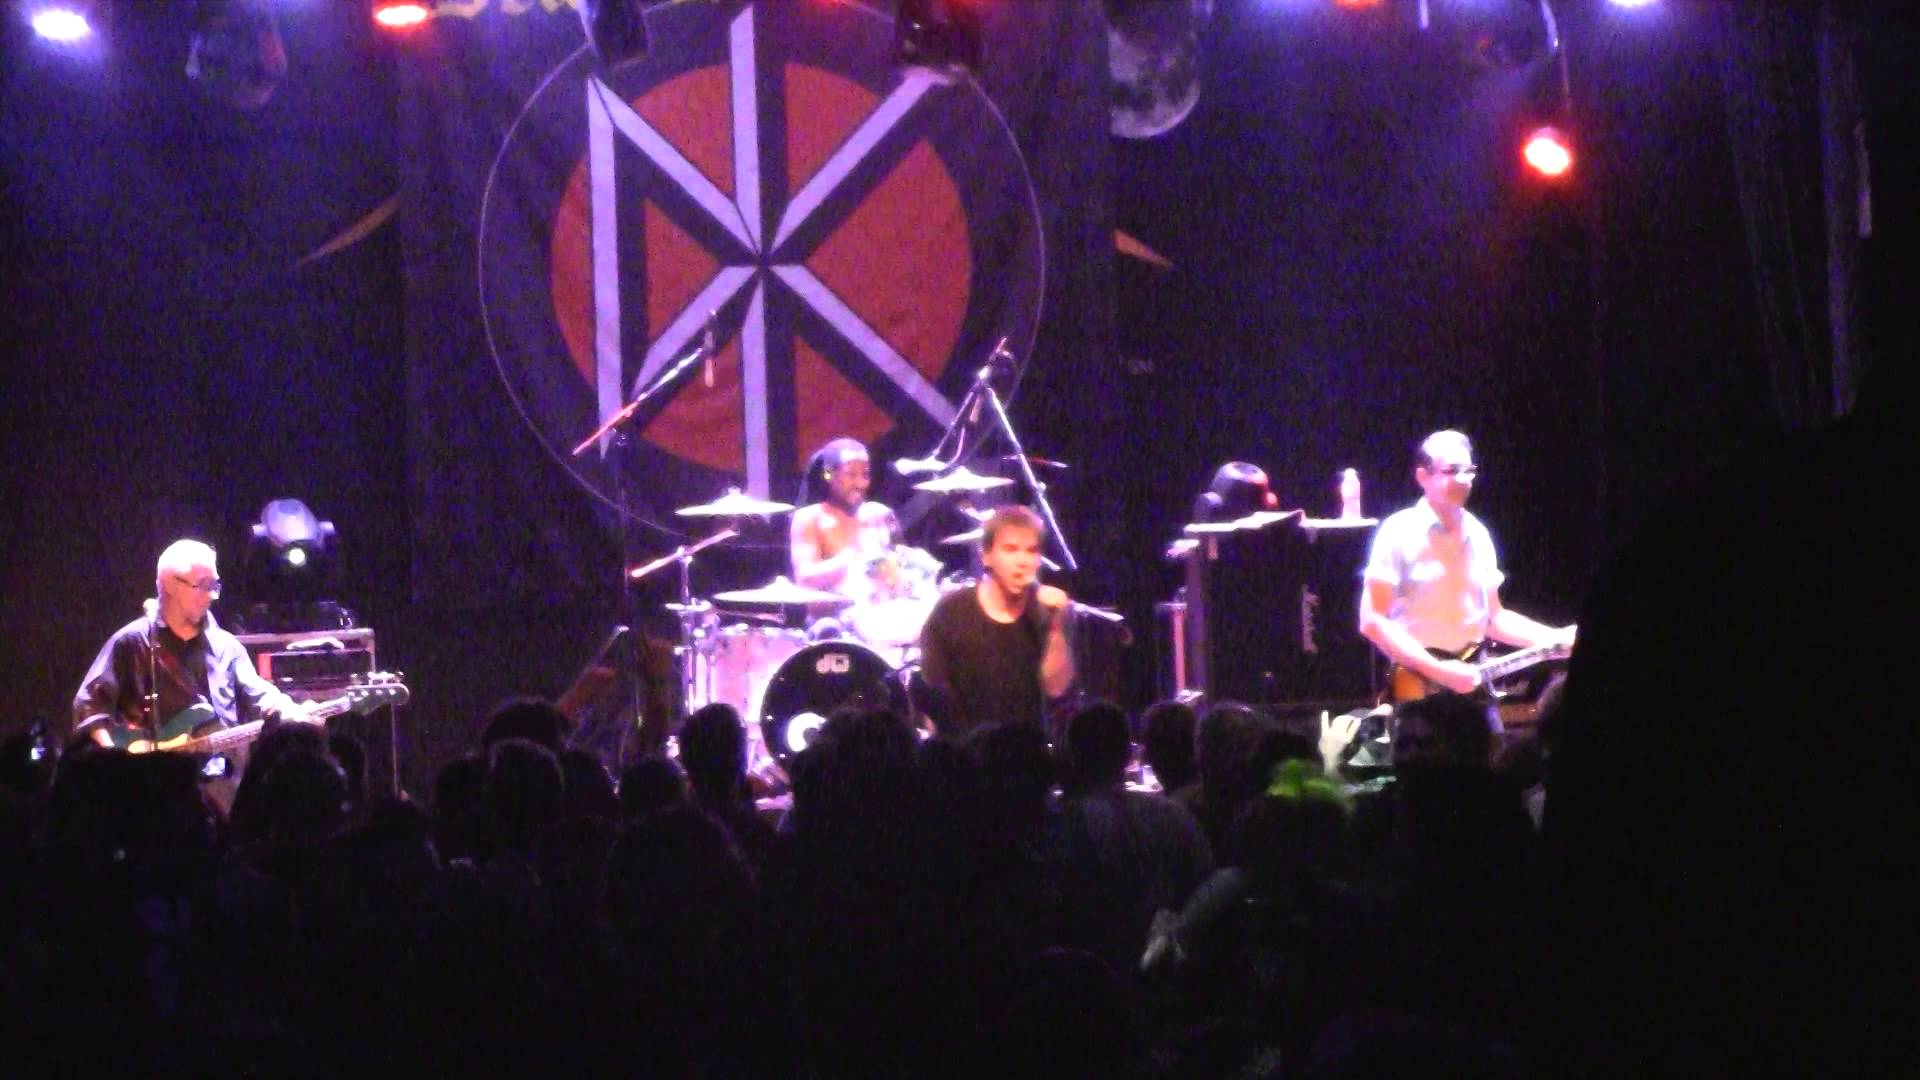 DEAD KENNEDYS - AGOURA HILLS CA - 1 / 17 / 2015 5 0F 6 VULTURE VIDEO